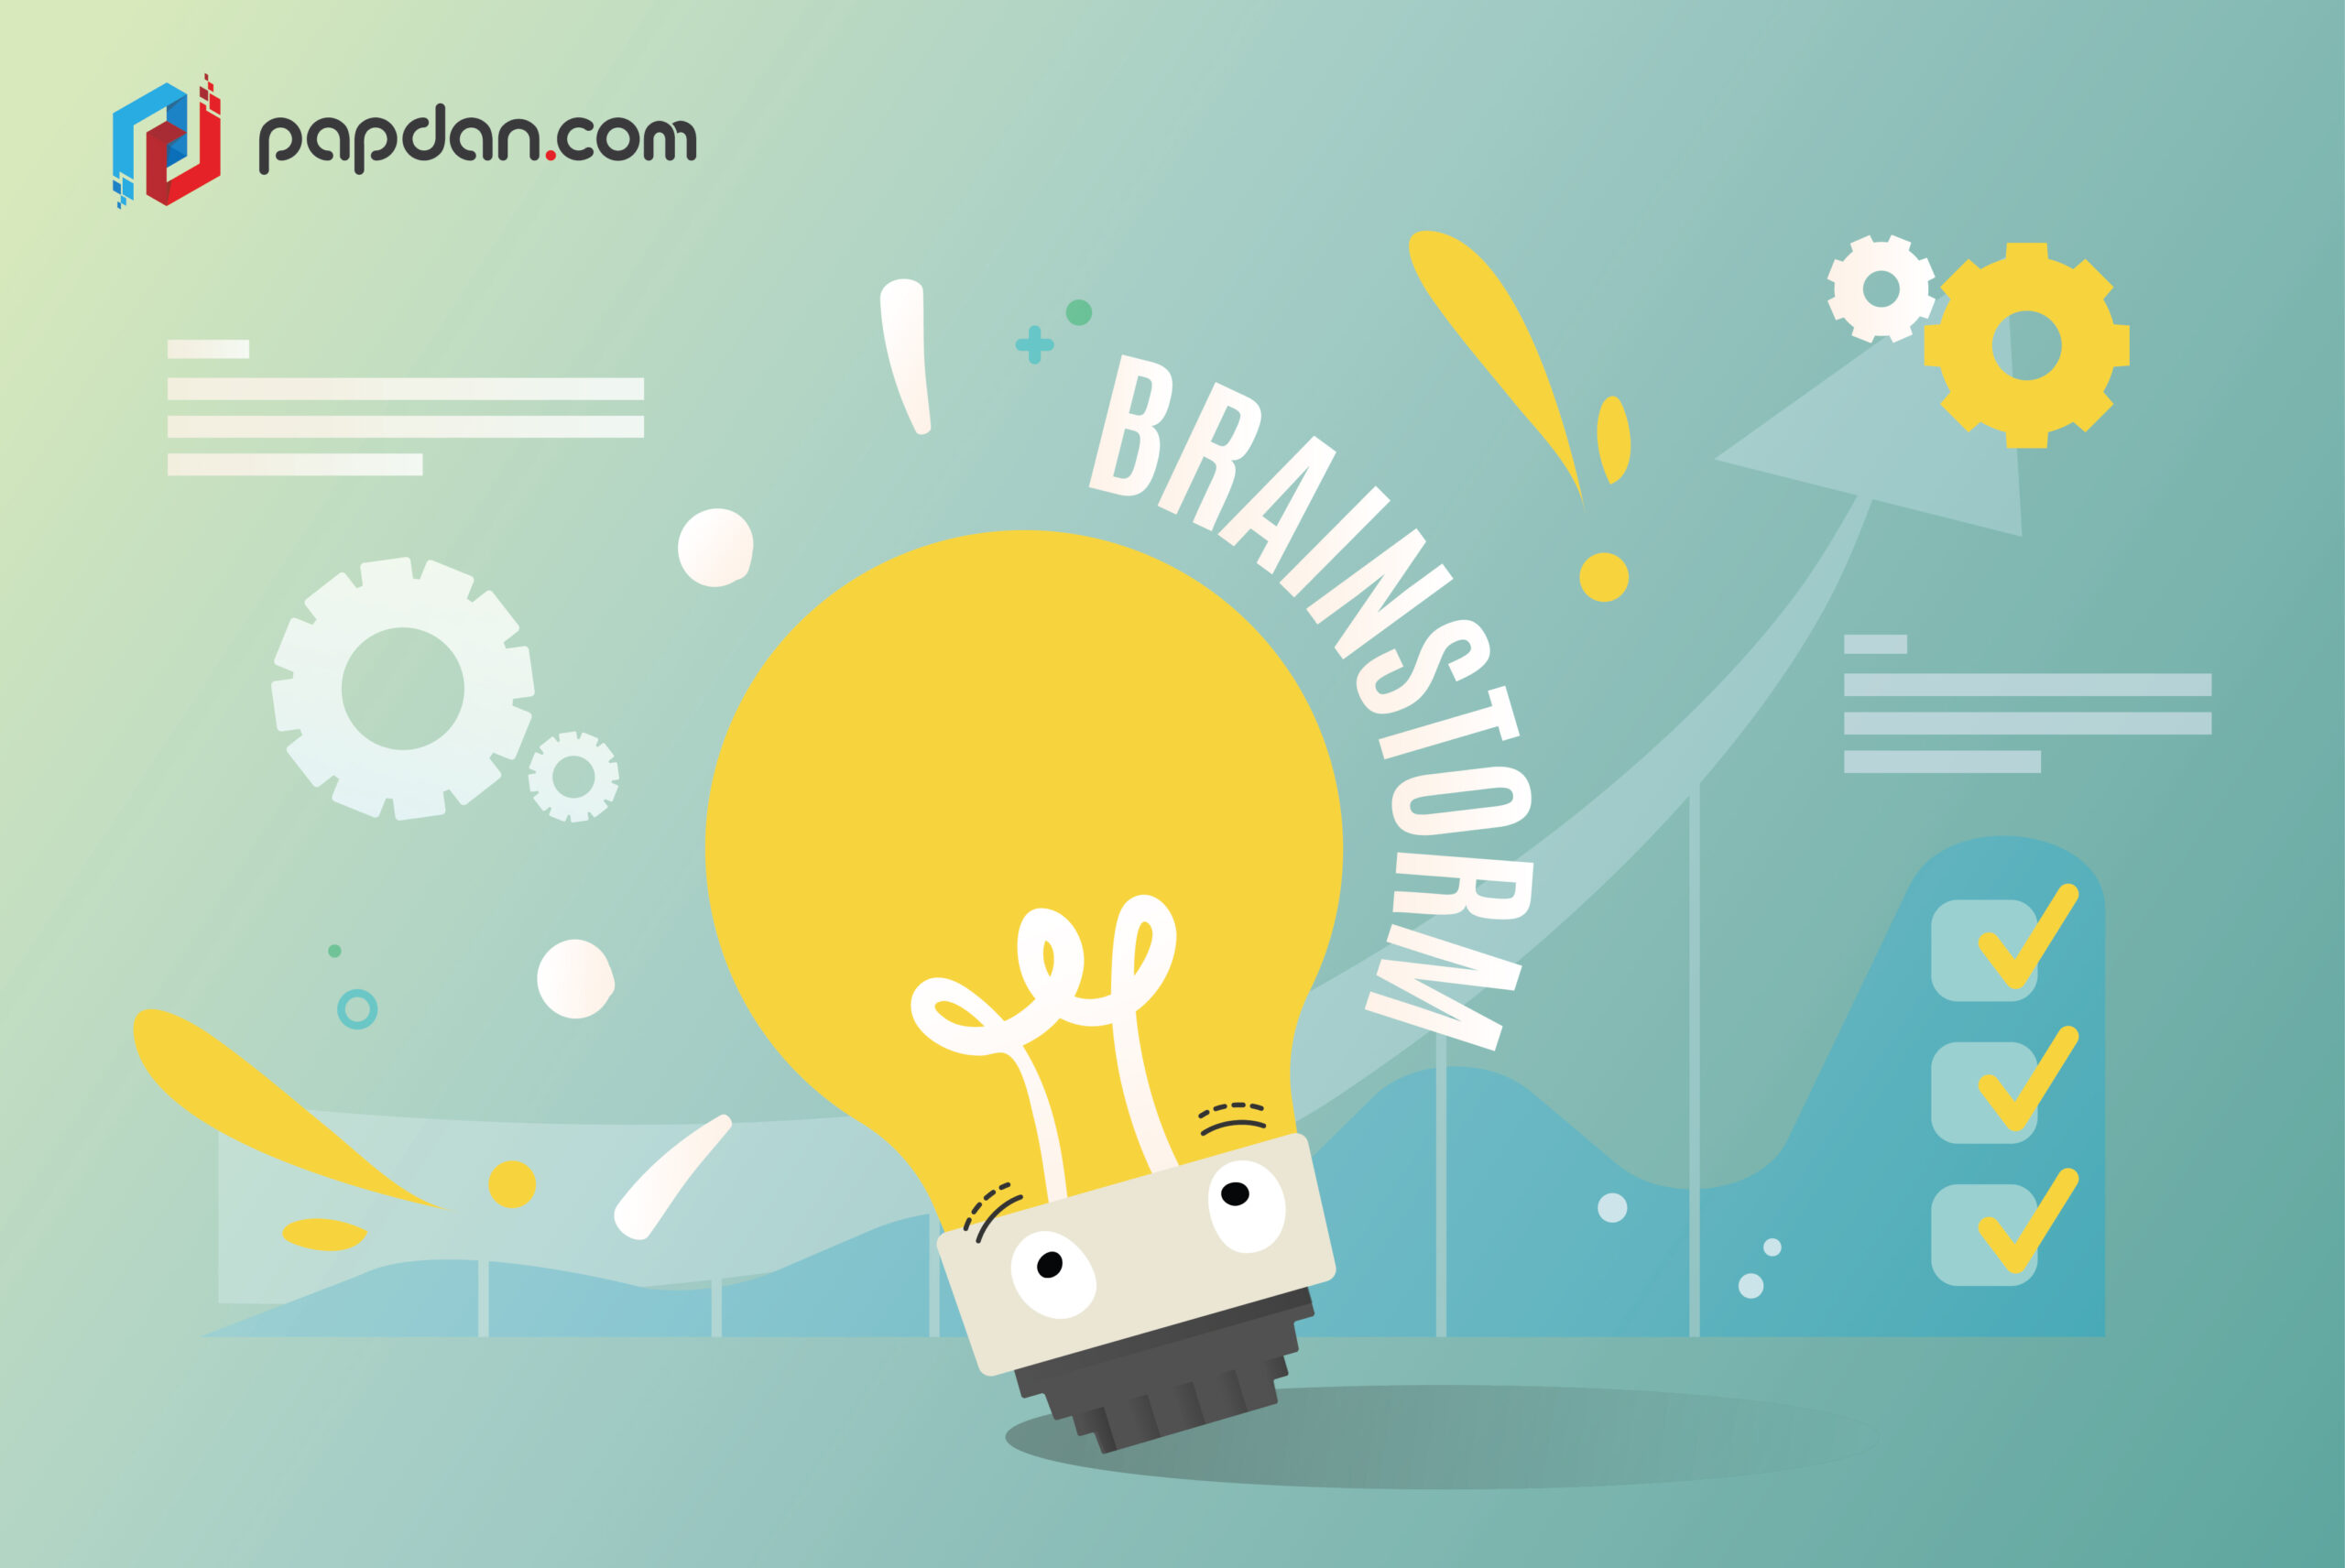 Small Business 101: Inspiring Tips for Brainstorming Business Blog Topics